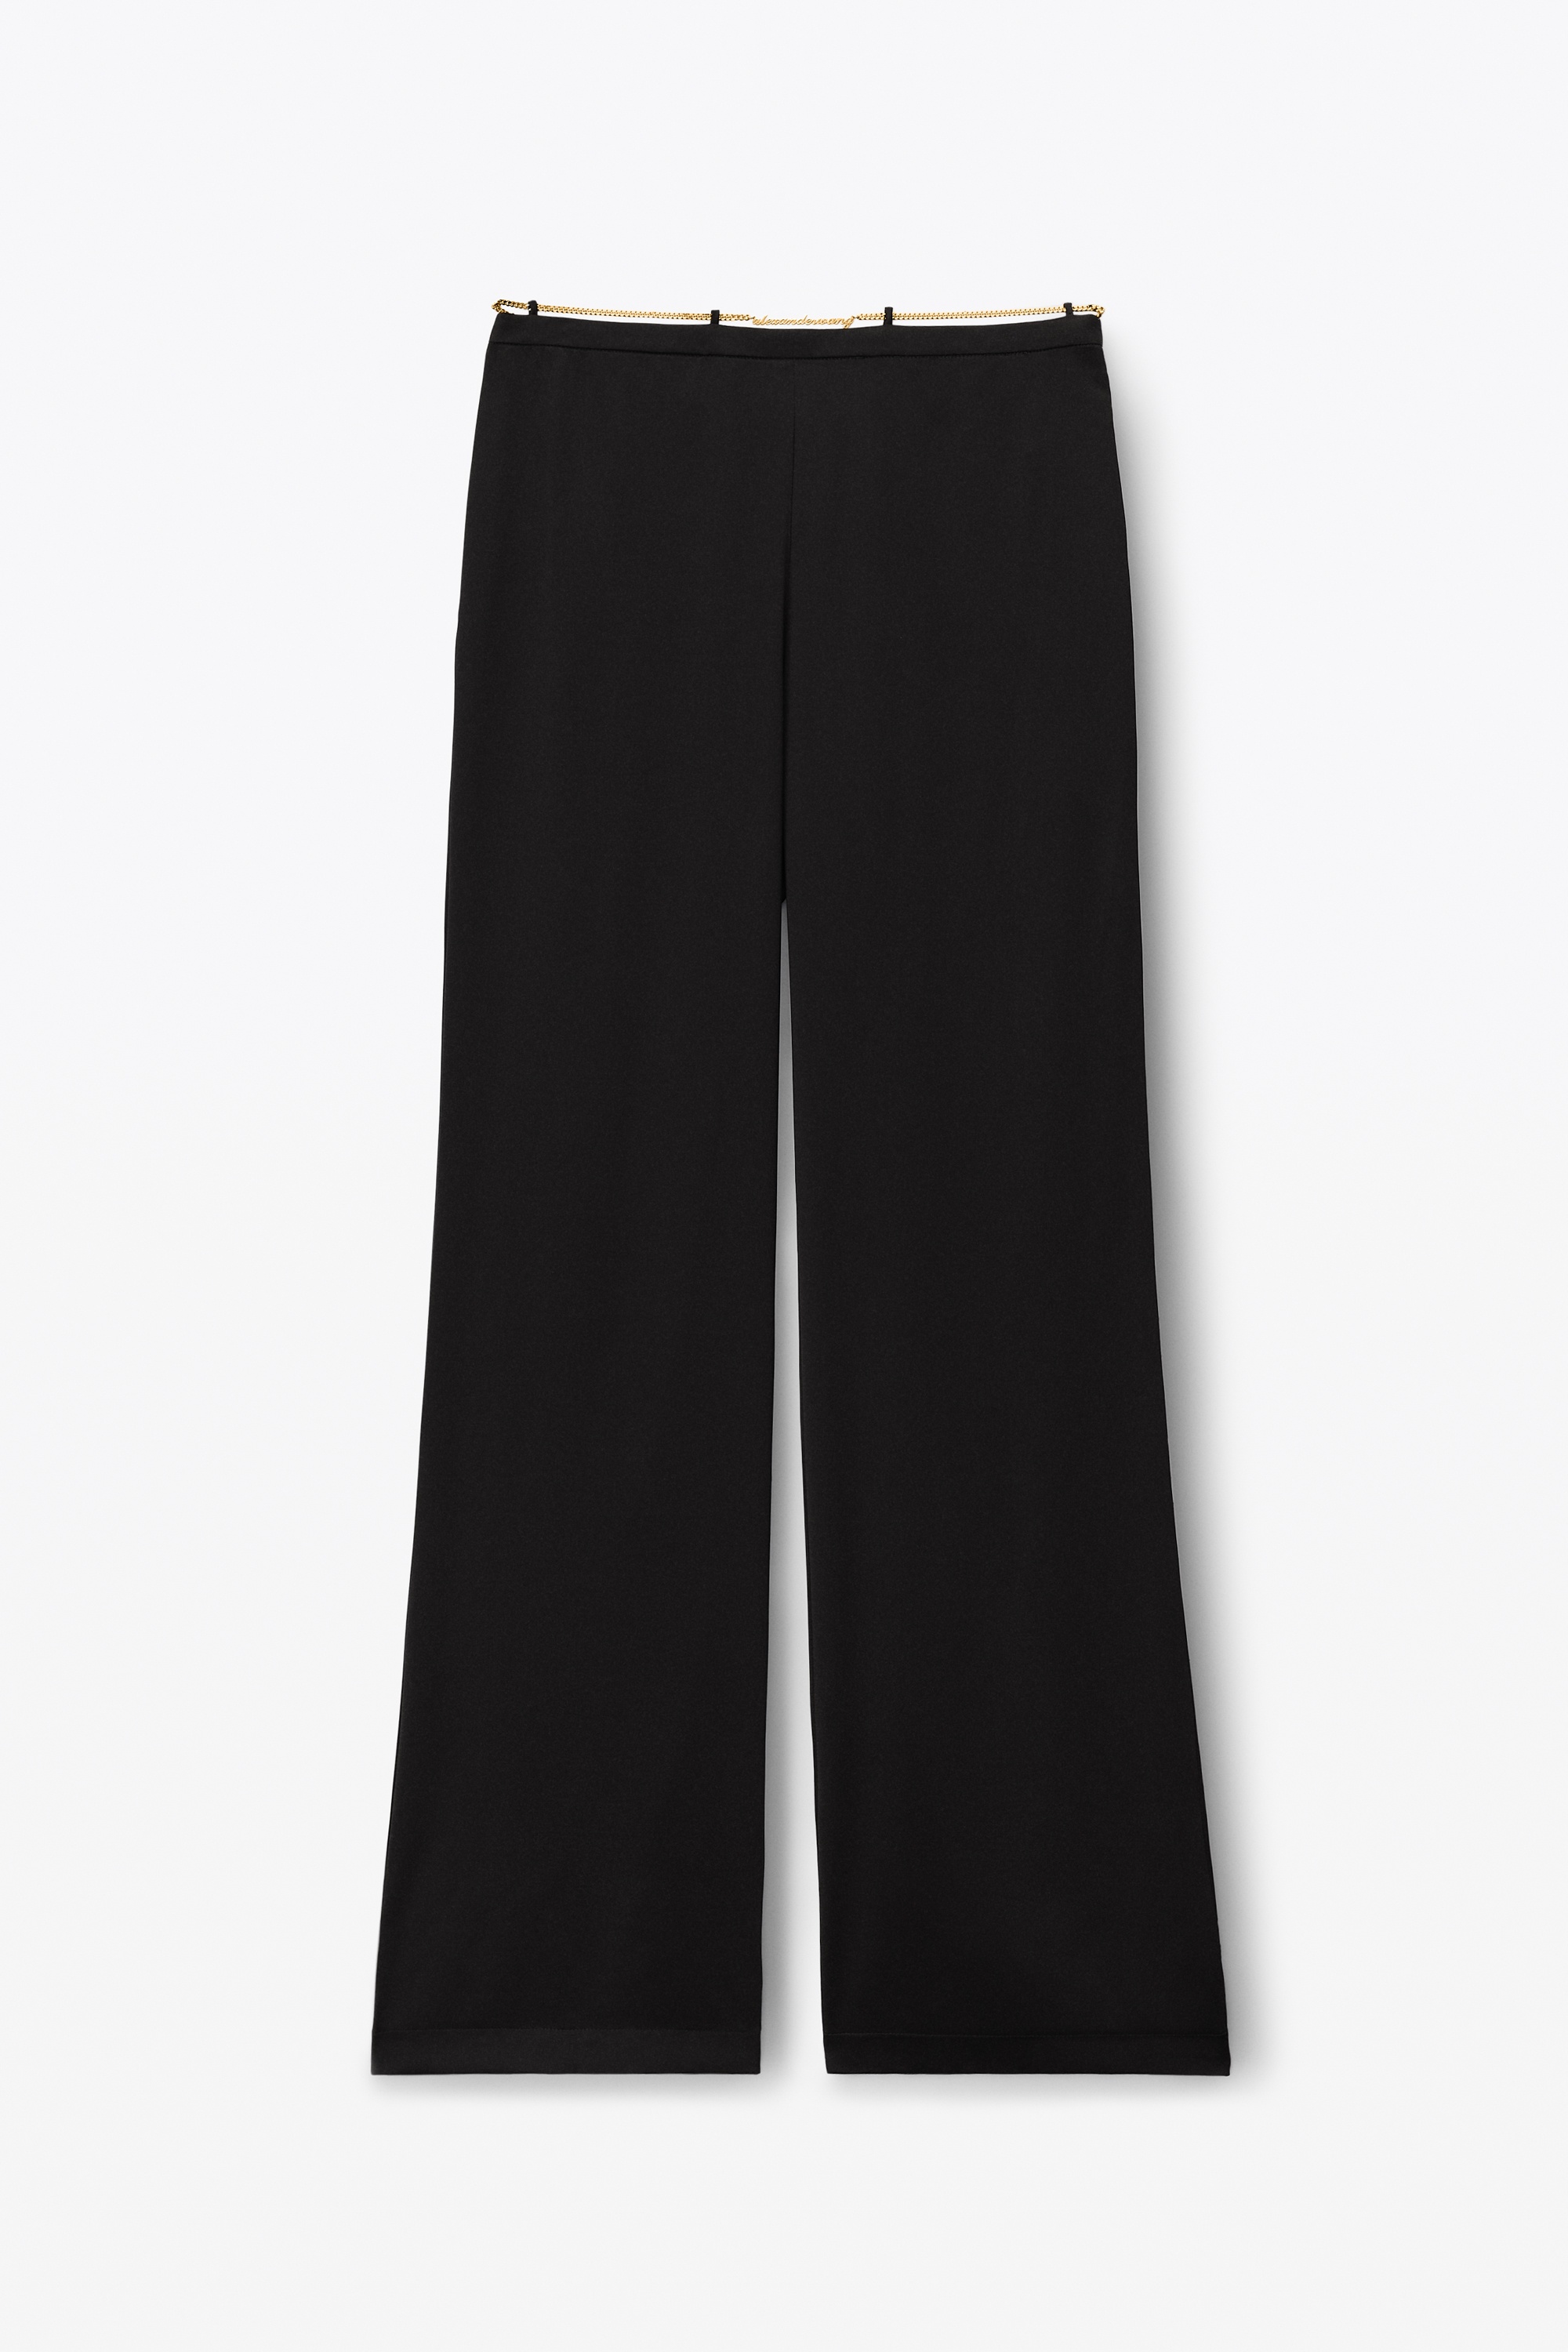 silk charmeuse flared low rise pant with nameplate - 1